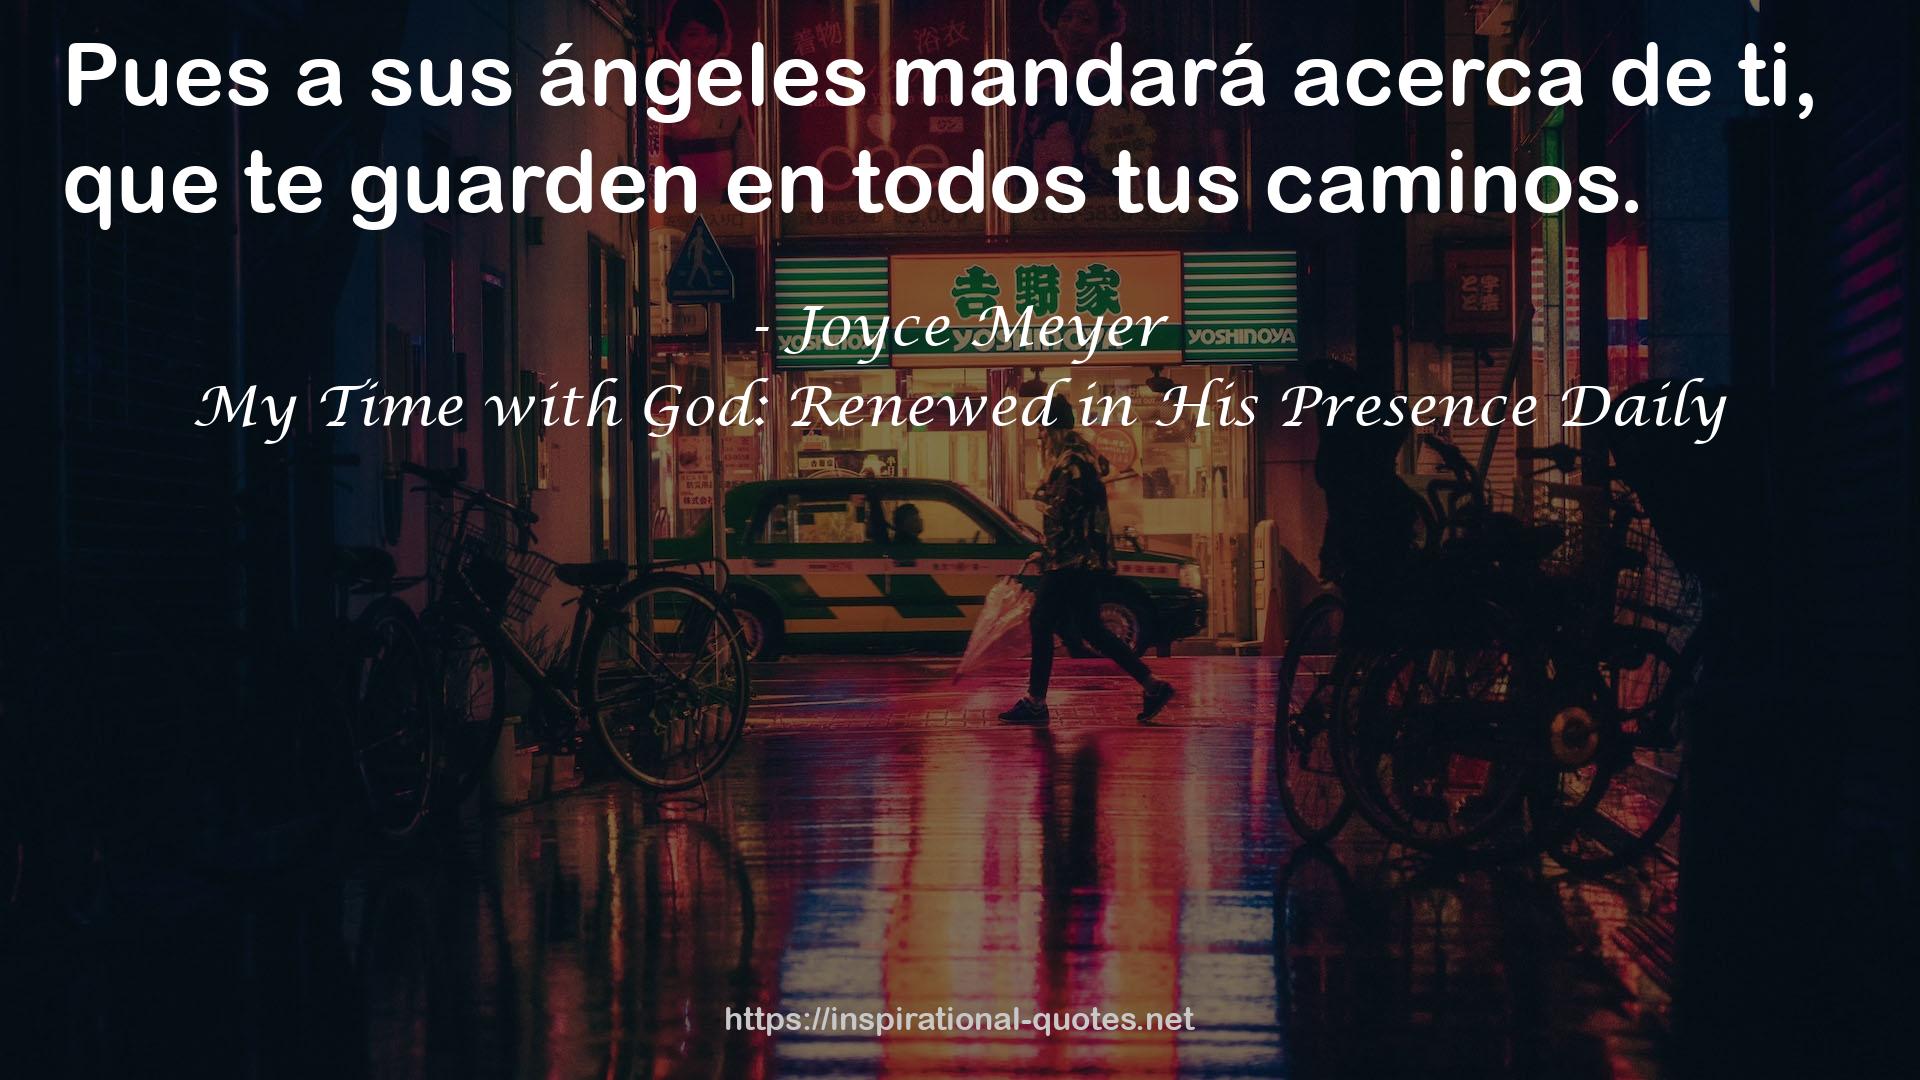 My Time with God: Renewed in His Presence Daily QUOTES